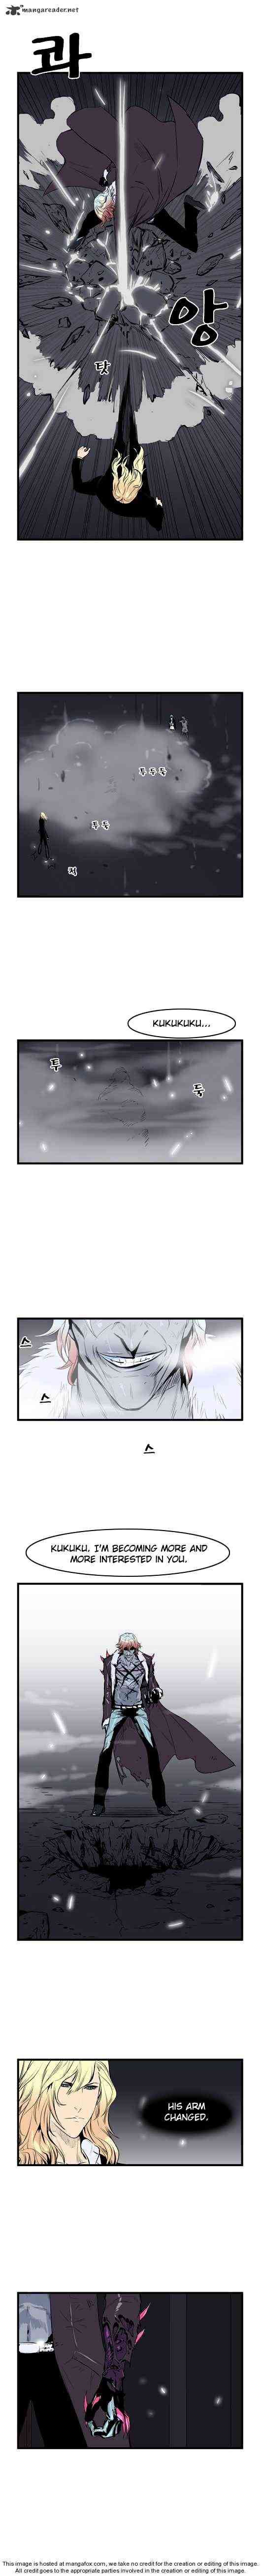 Noblesse Chapter 46 _ Chapters 46-60 page 3